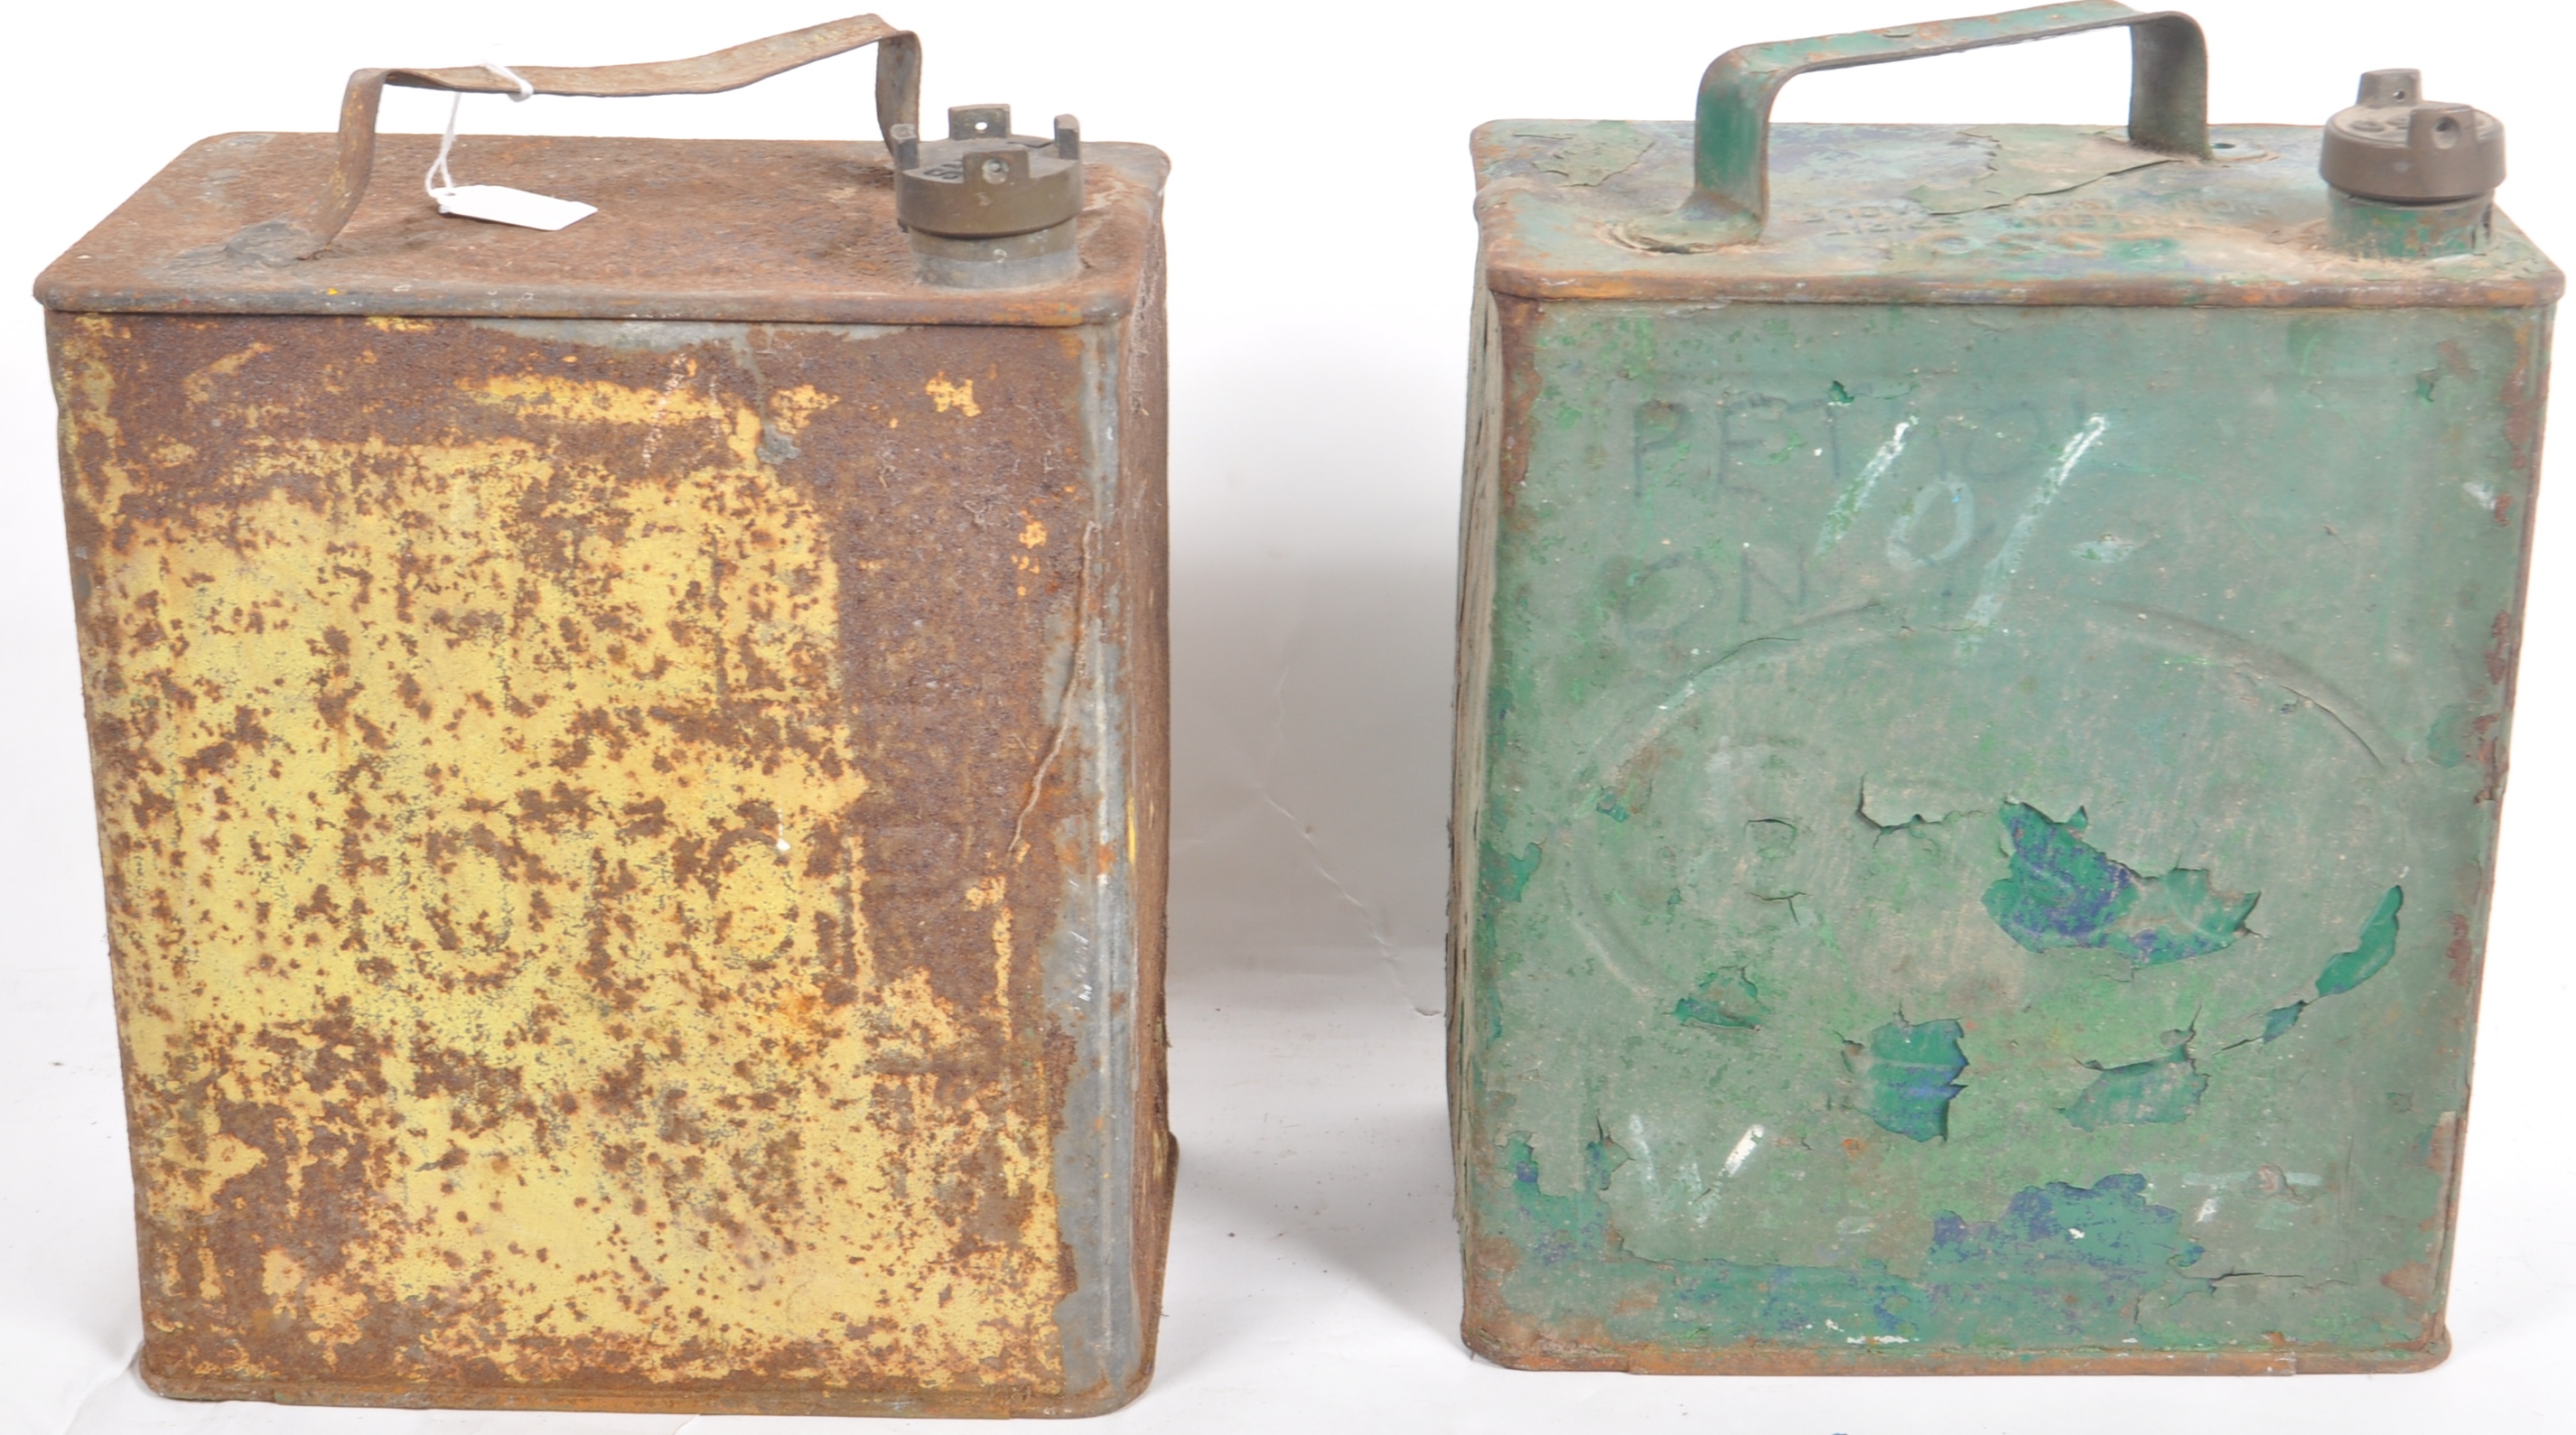 ESSO / SHELL - MOTORING INTEREST - TWO GALLON PETROL CANS